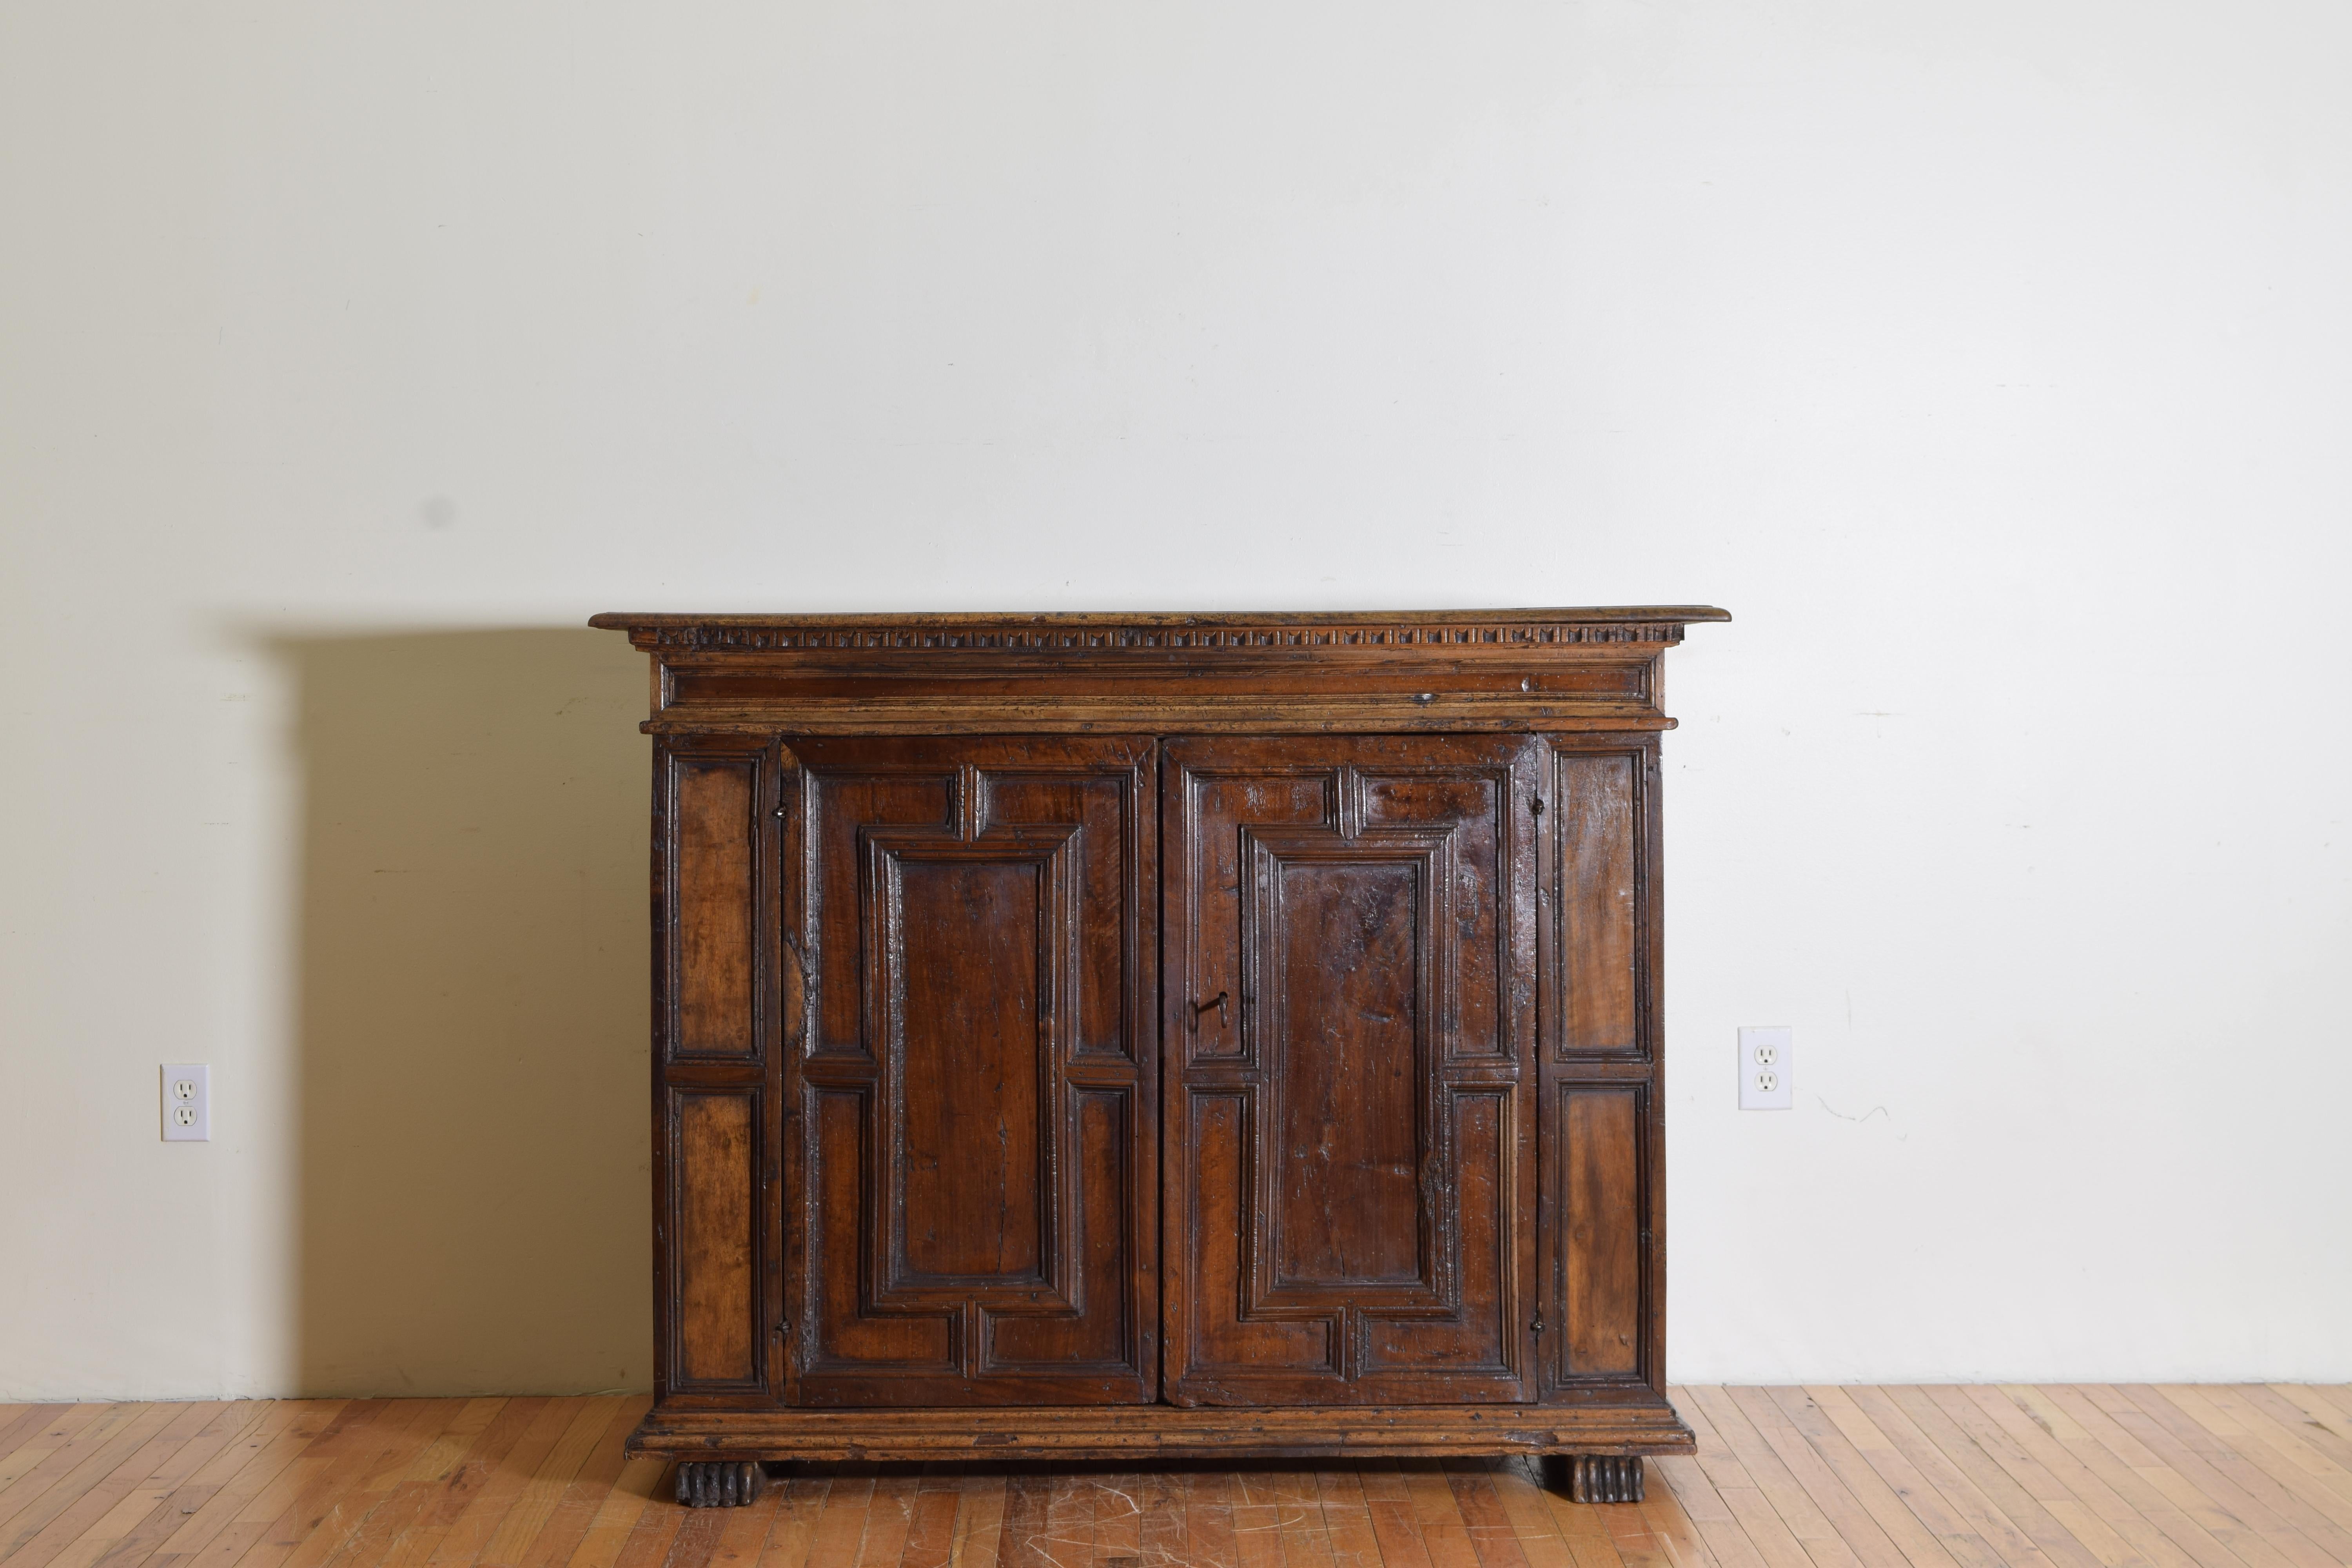 having a rectangular top with dentile molded edge above a conforming case, the doors with raised panels and opening to reveal interior shelving, raised on carved paw feet, depth of 20